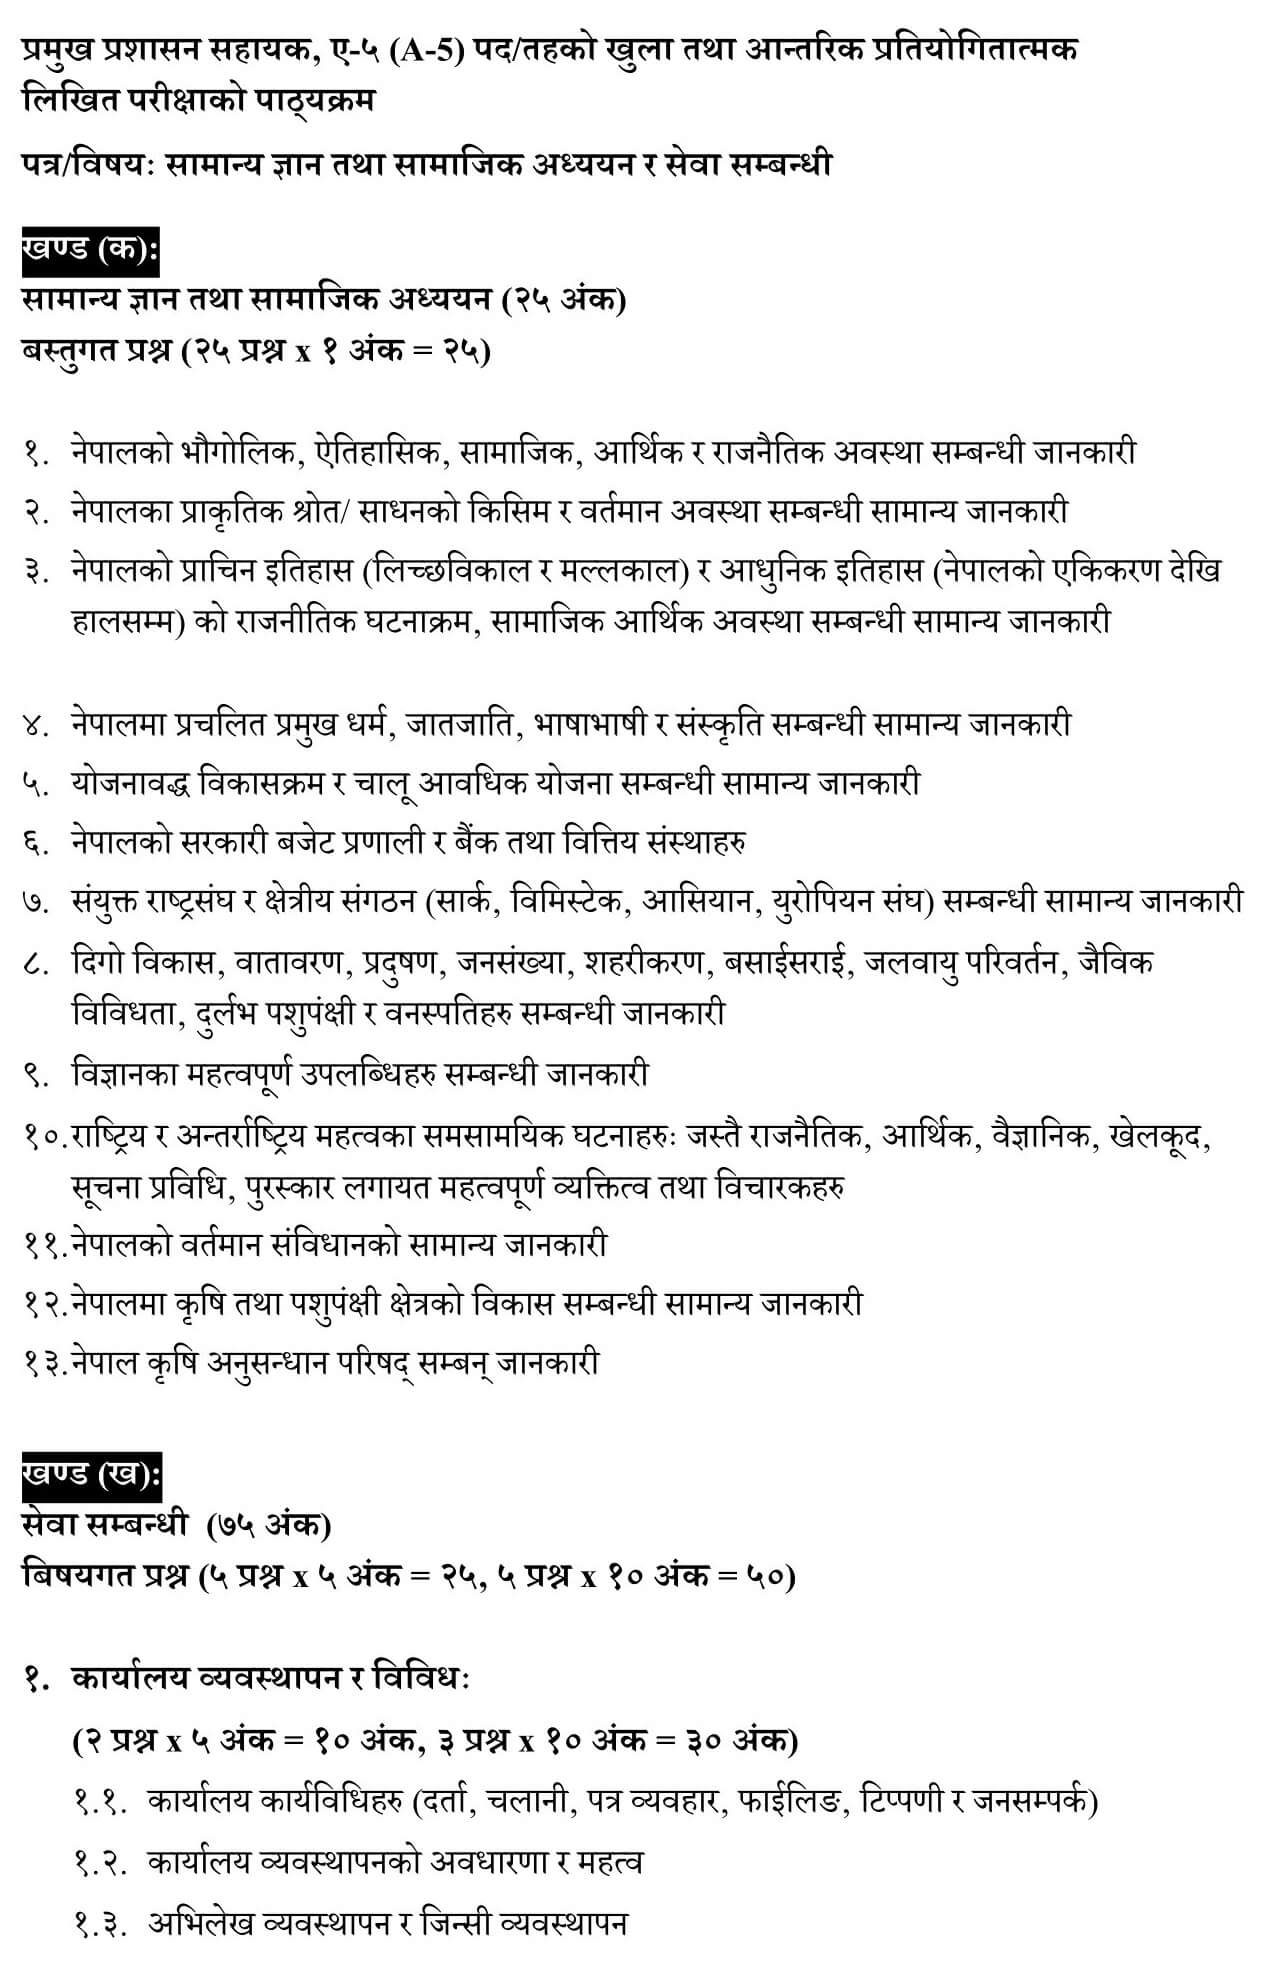 Nepal Agricultural Research Council Level 5 Administration Syllabus. NARC Level 5 Administration Syllabus. NARC Syllabus.